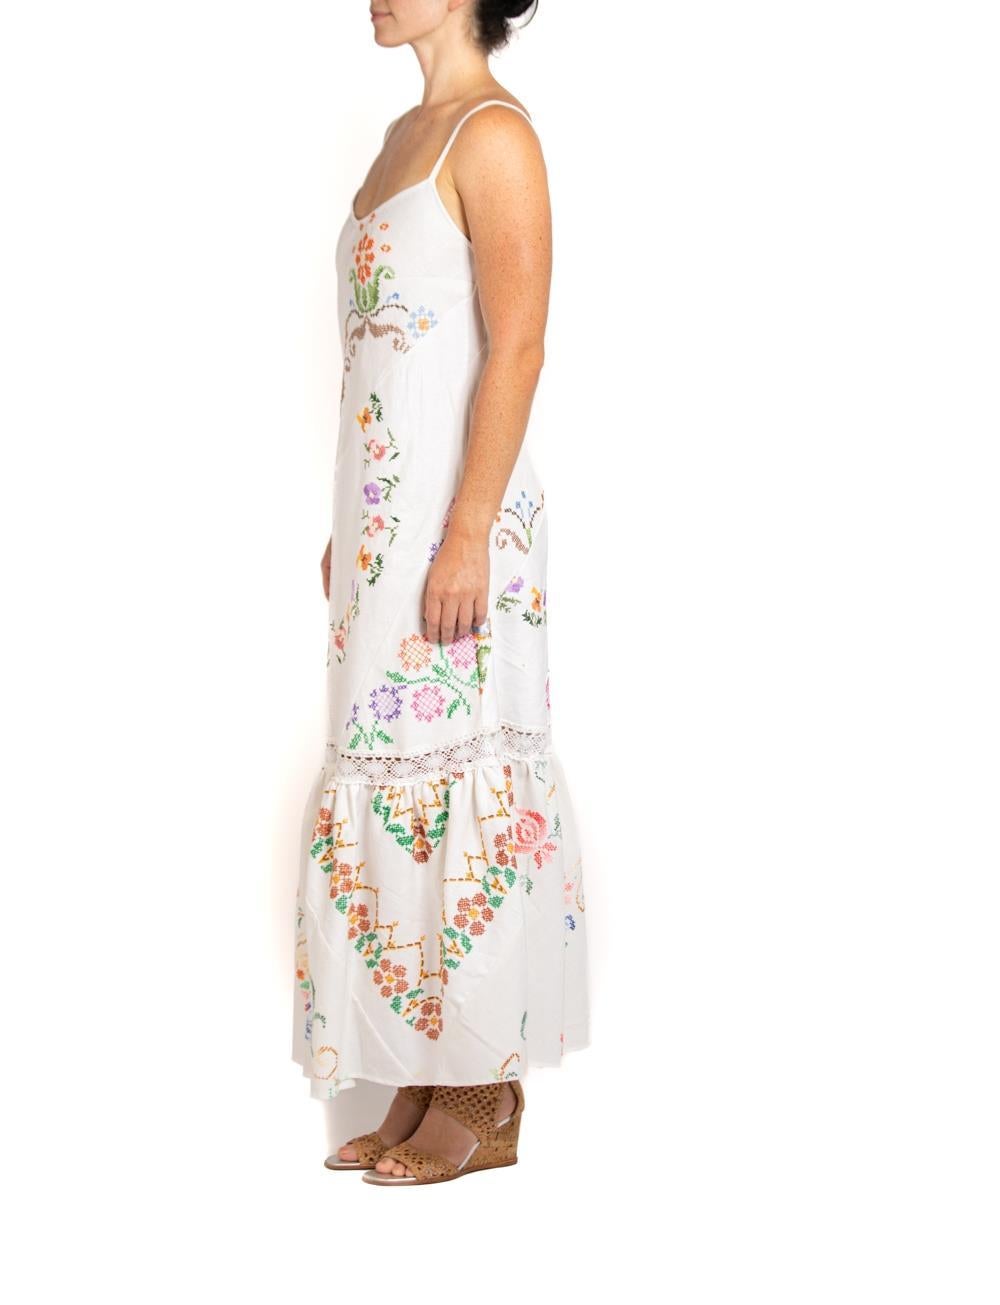 MORPHEW COLLECTION White & Floral Hand Embroidered Fabric From France Dress
MORPHEW COLLECTION is made entirely by hand in our NYC Ateliér of rare antique materials sourced from around the globe. Our sustainable vintage materials represent over a